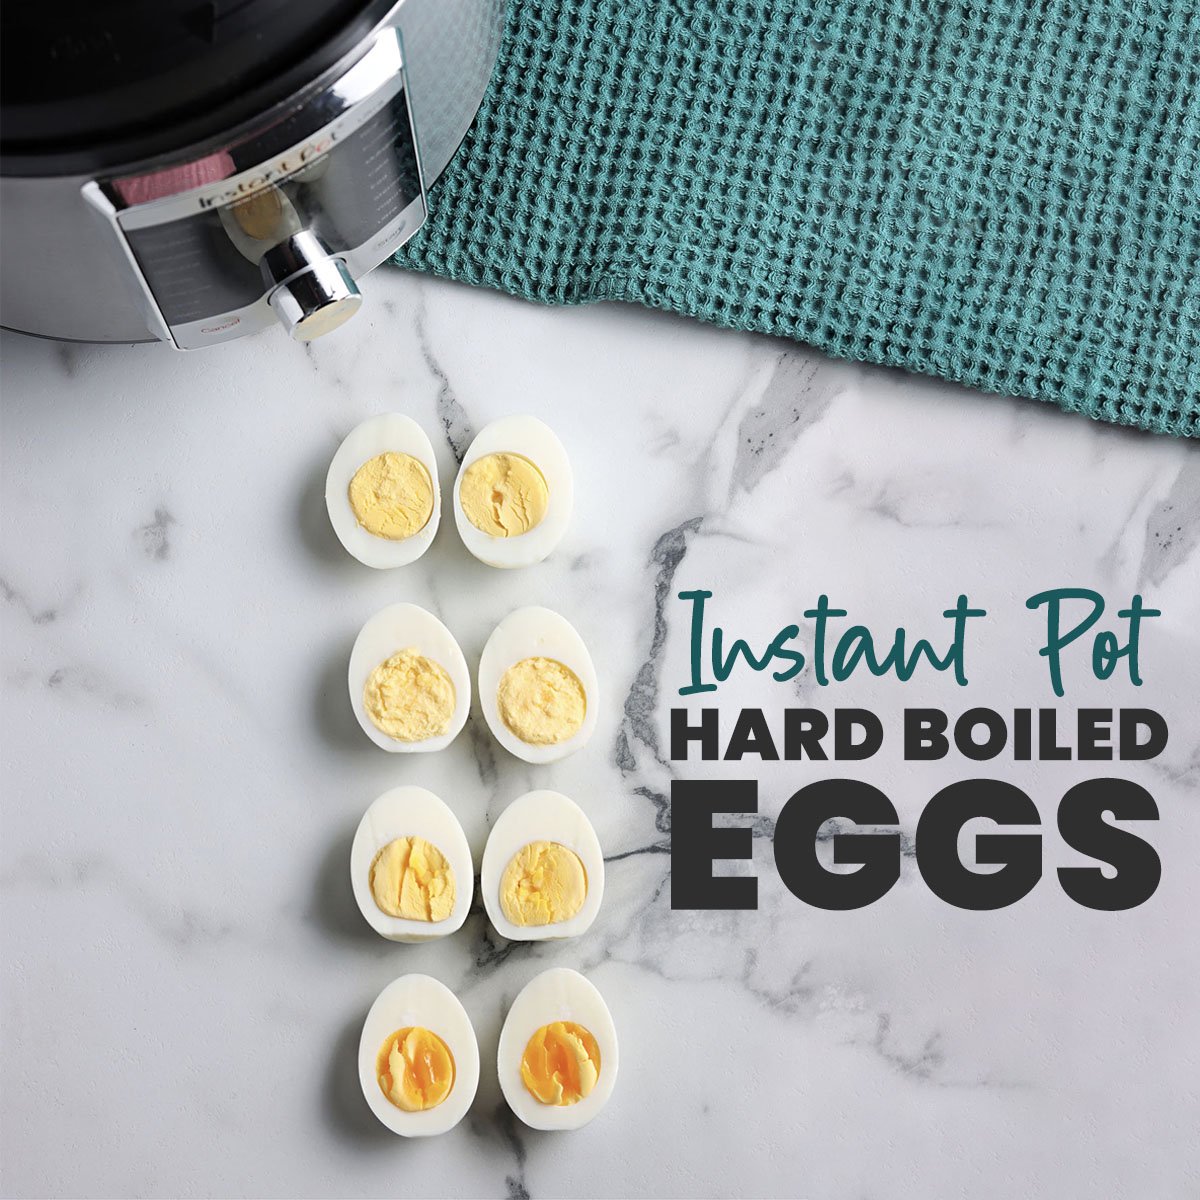 https://www.persnicketyplates.com/wp-content/uploads/2022/04/instant-pot-hard-boiled-eggs-TITLE-copy.jpg